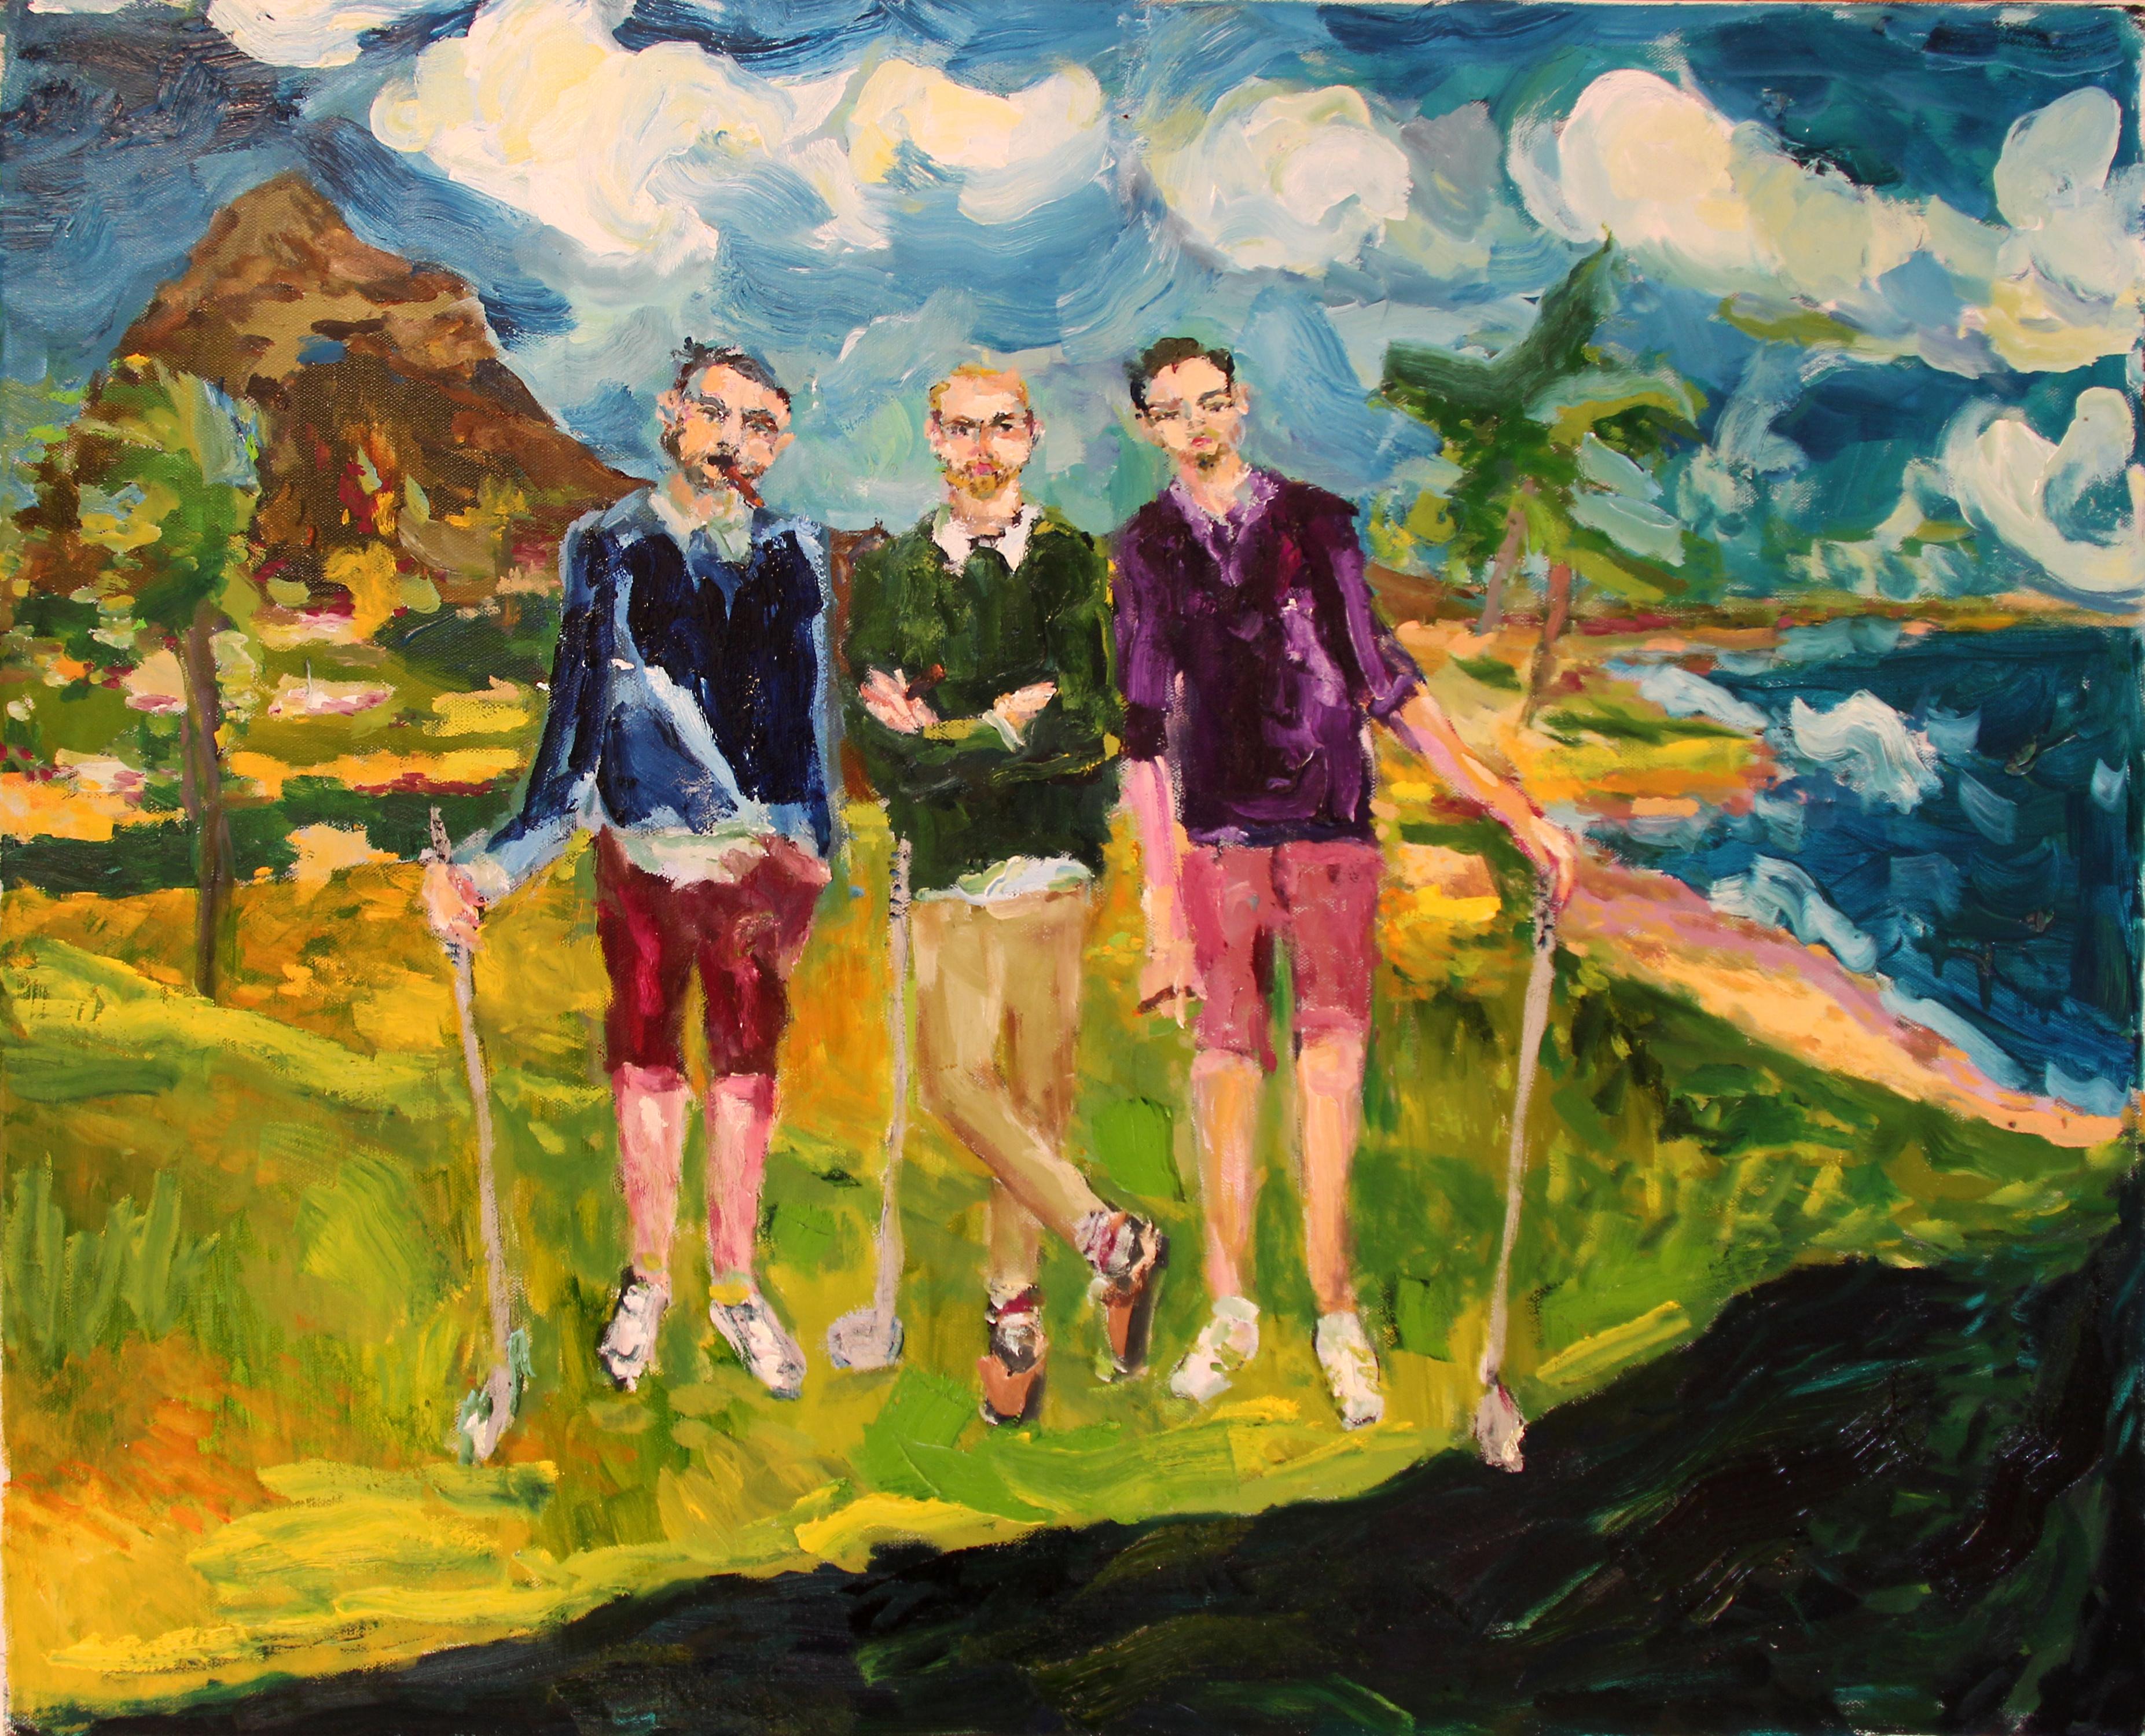 Bradley Wood Figurative Painting - In the Rough, figurative oil painting of three men playing golf outdoors